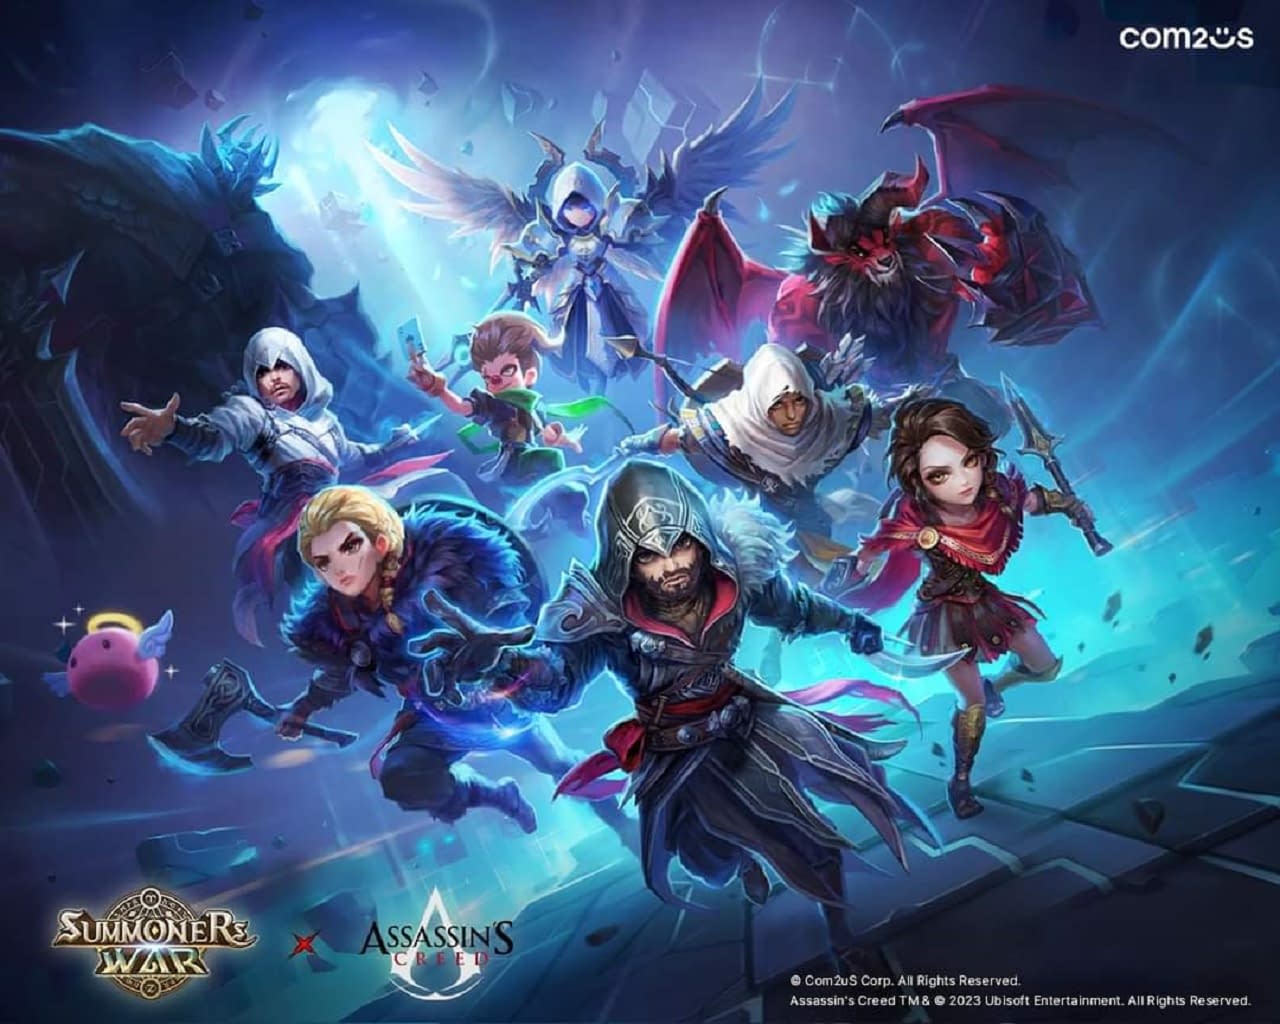 Summoners War Sky Arena Reveals Details For Assassins Creed Collab